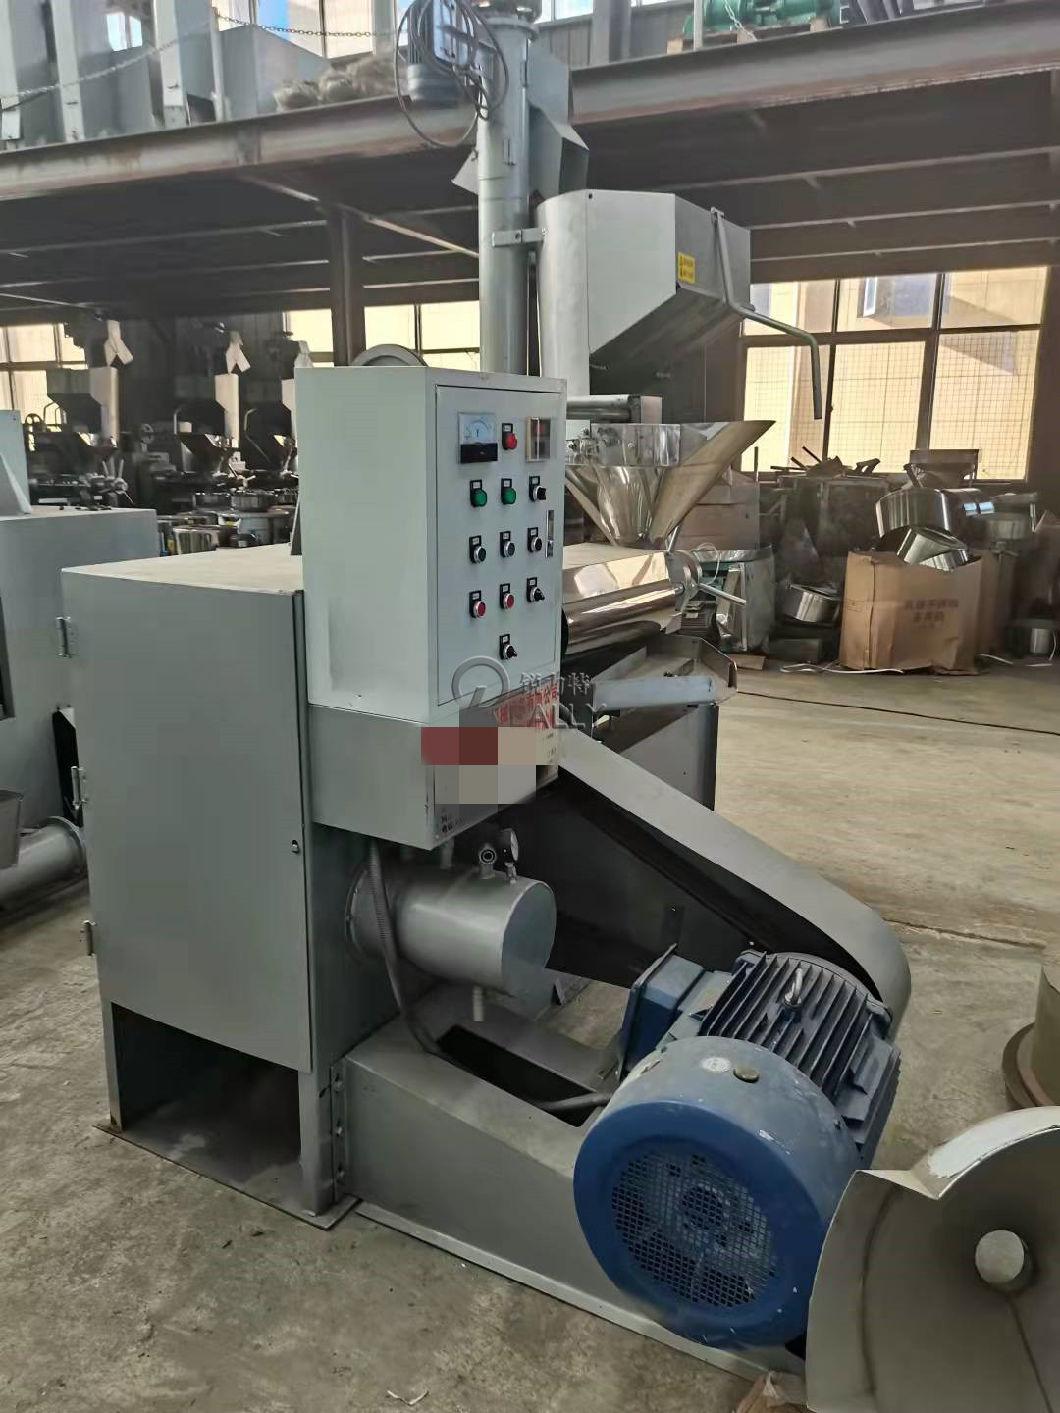 Automatic Hydraulic Cold Oil Extractor Coconut Oil Making Machine Sunflower Seeds Coconut Sesame Peanut Palm Kernel Oil Expeller Extraction Making Machine